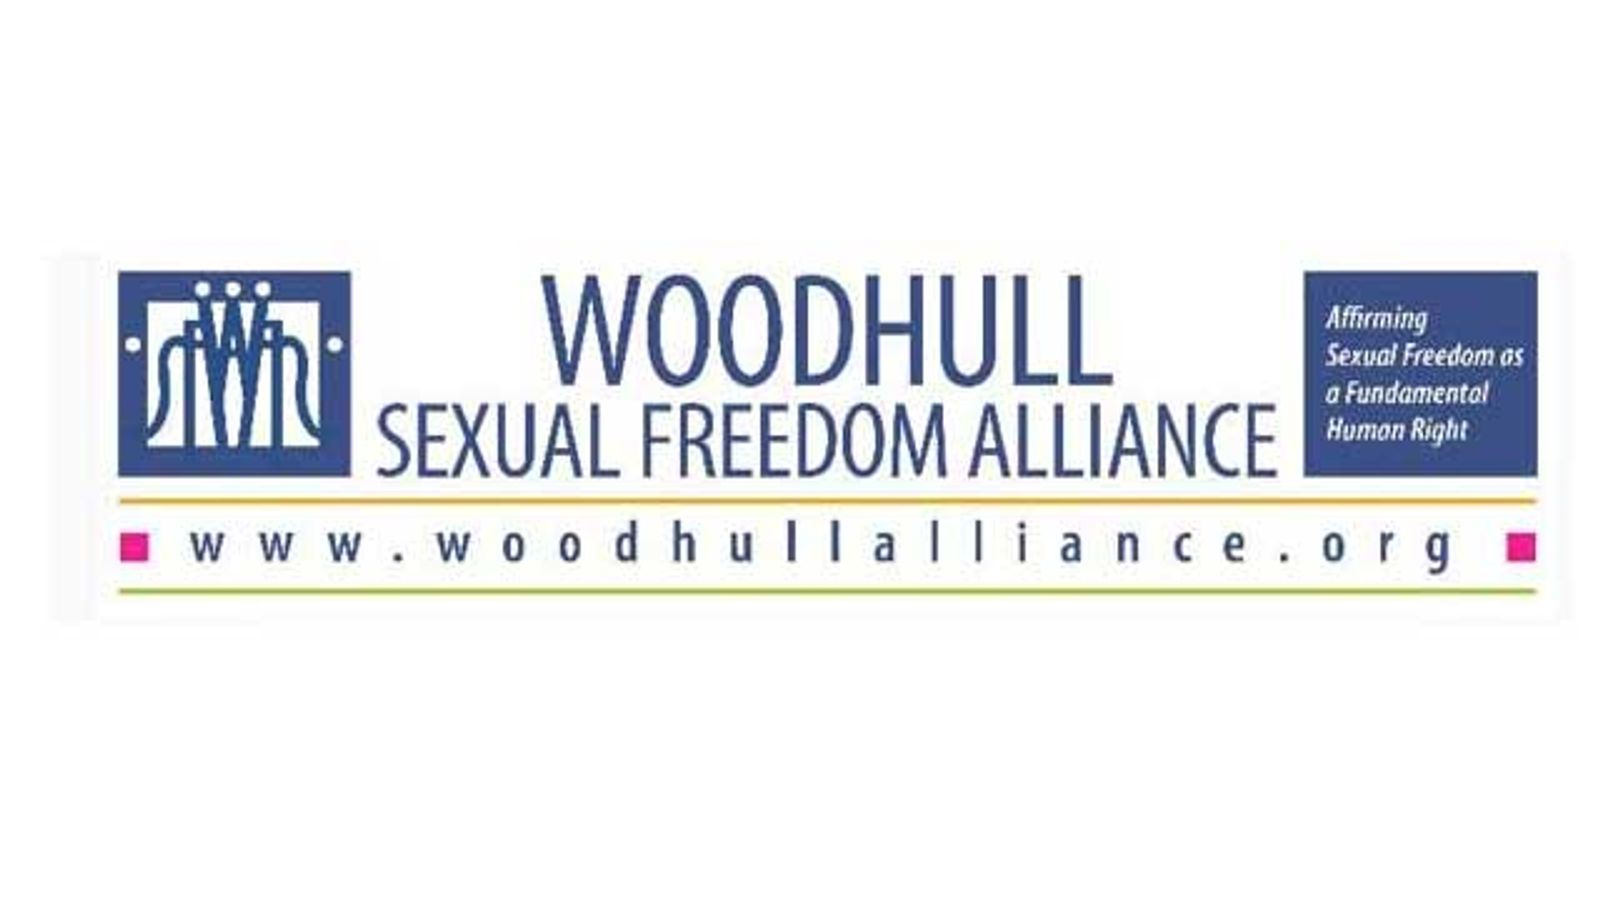 Sexual Freedom Leaders to be Honored at Woodhull Summit